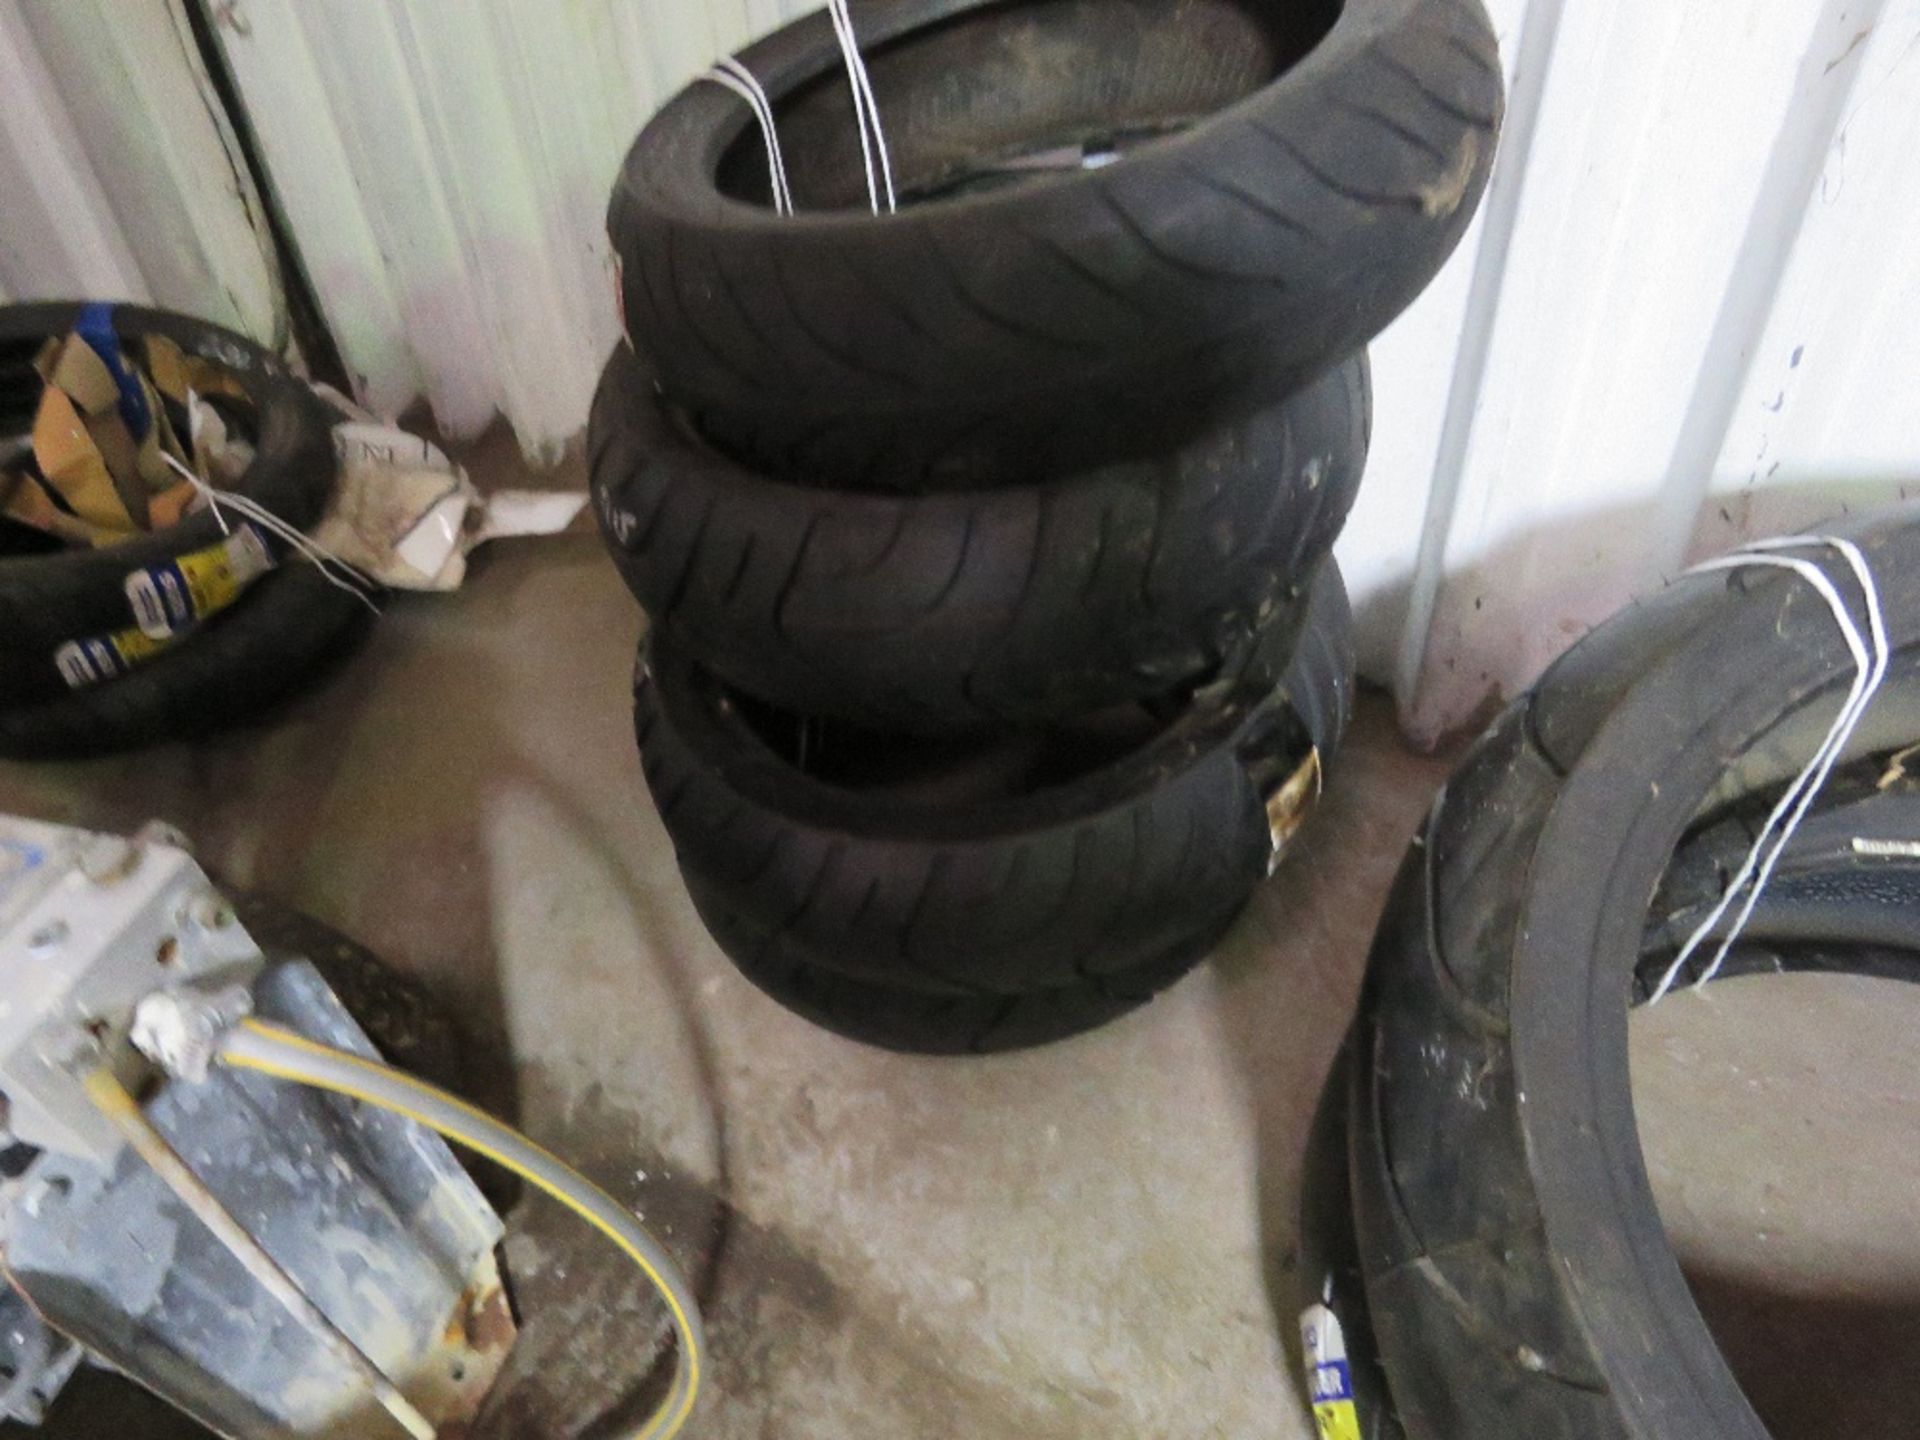 4 X SCOOTER MOTORBIKE TYRES, 2 X 140/60-13 AND 2 X 140/60-13. SOURCED FROM COMPANY LIQUIDATION. THIS